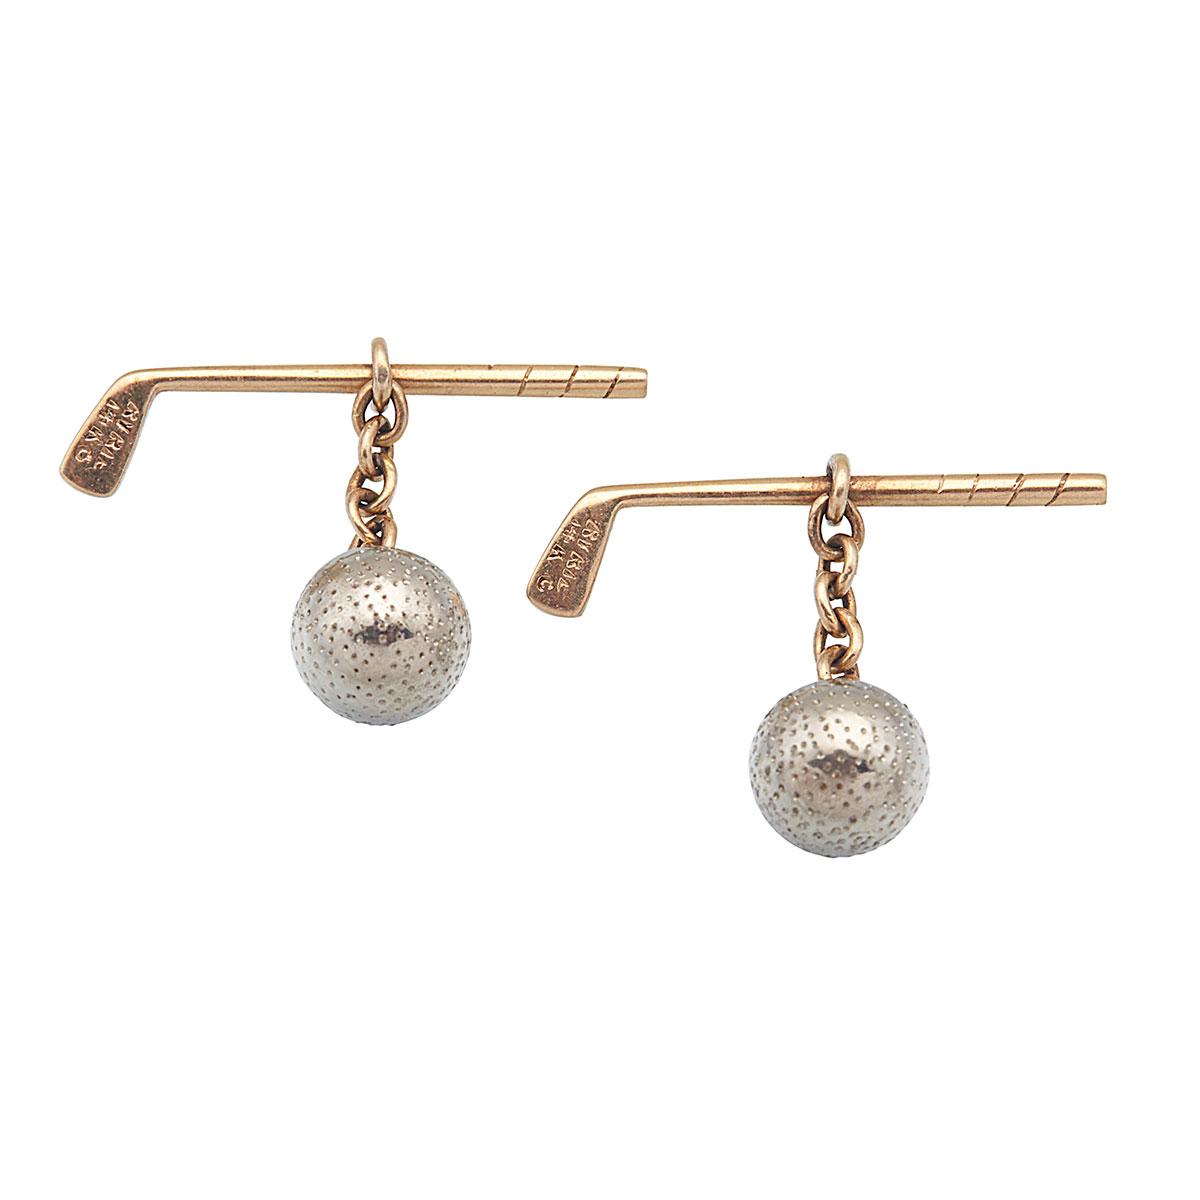 Pair Of Ryrie 14k Yellow And White Gold Cufflinks